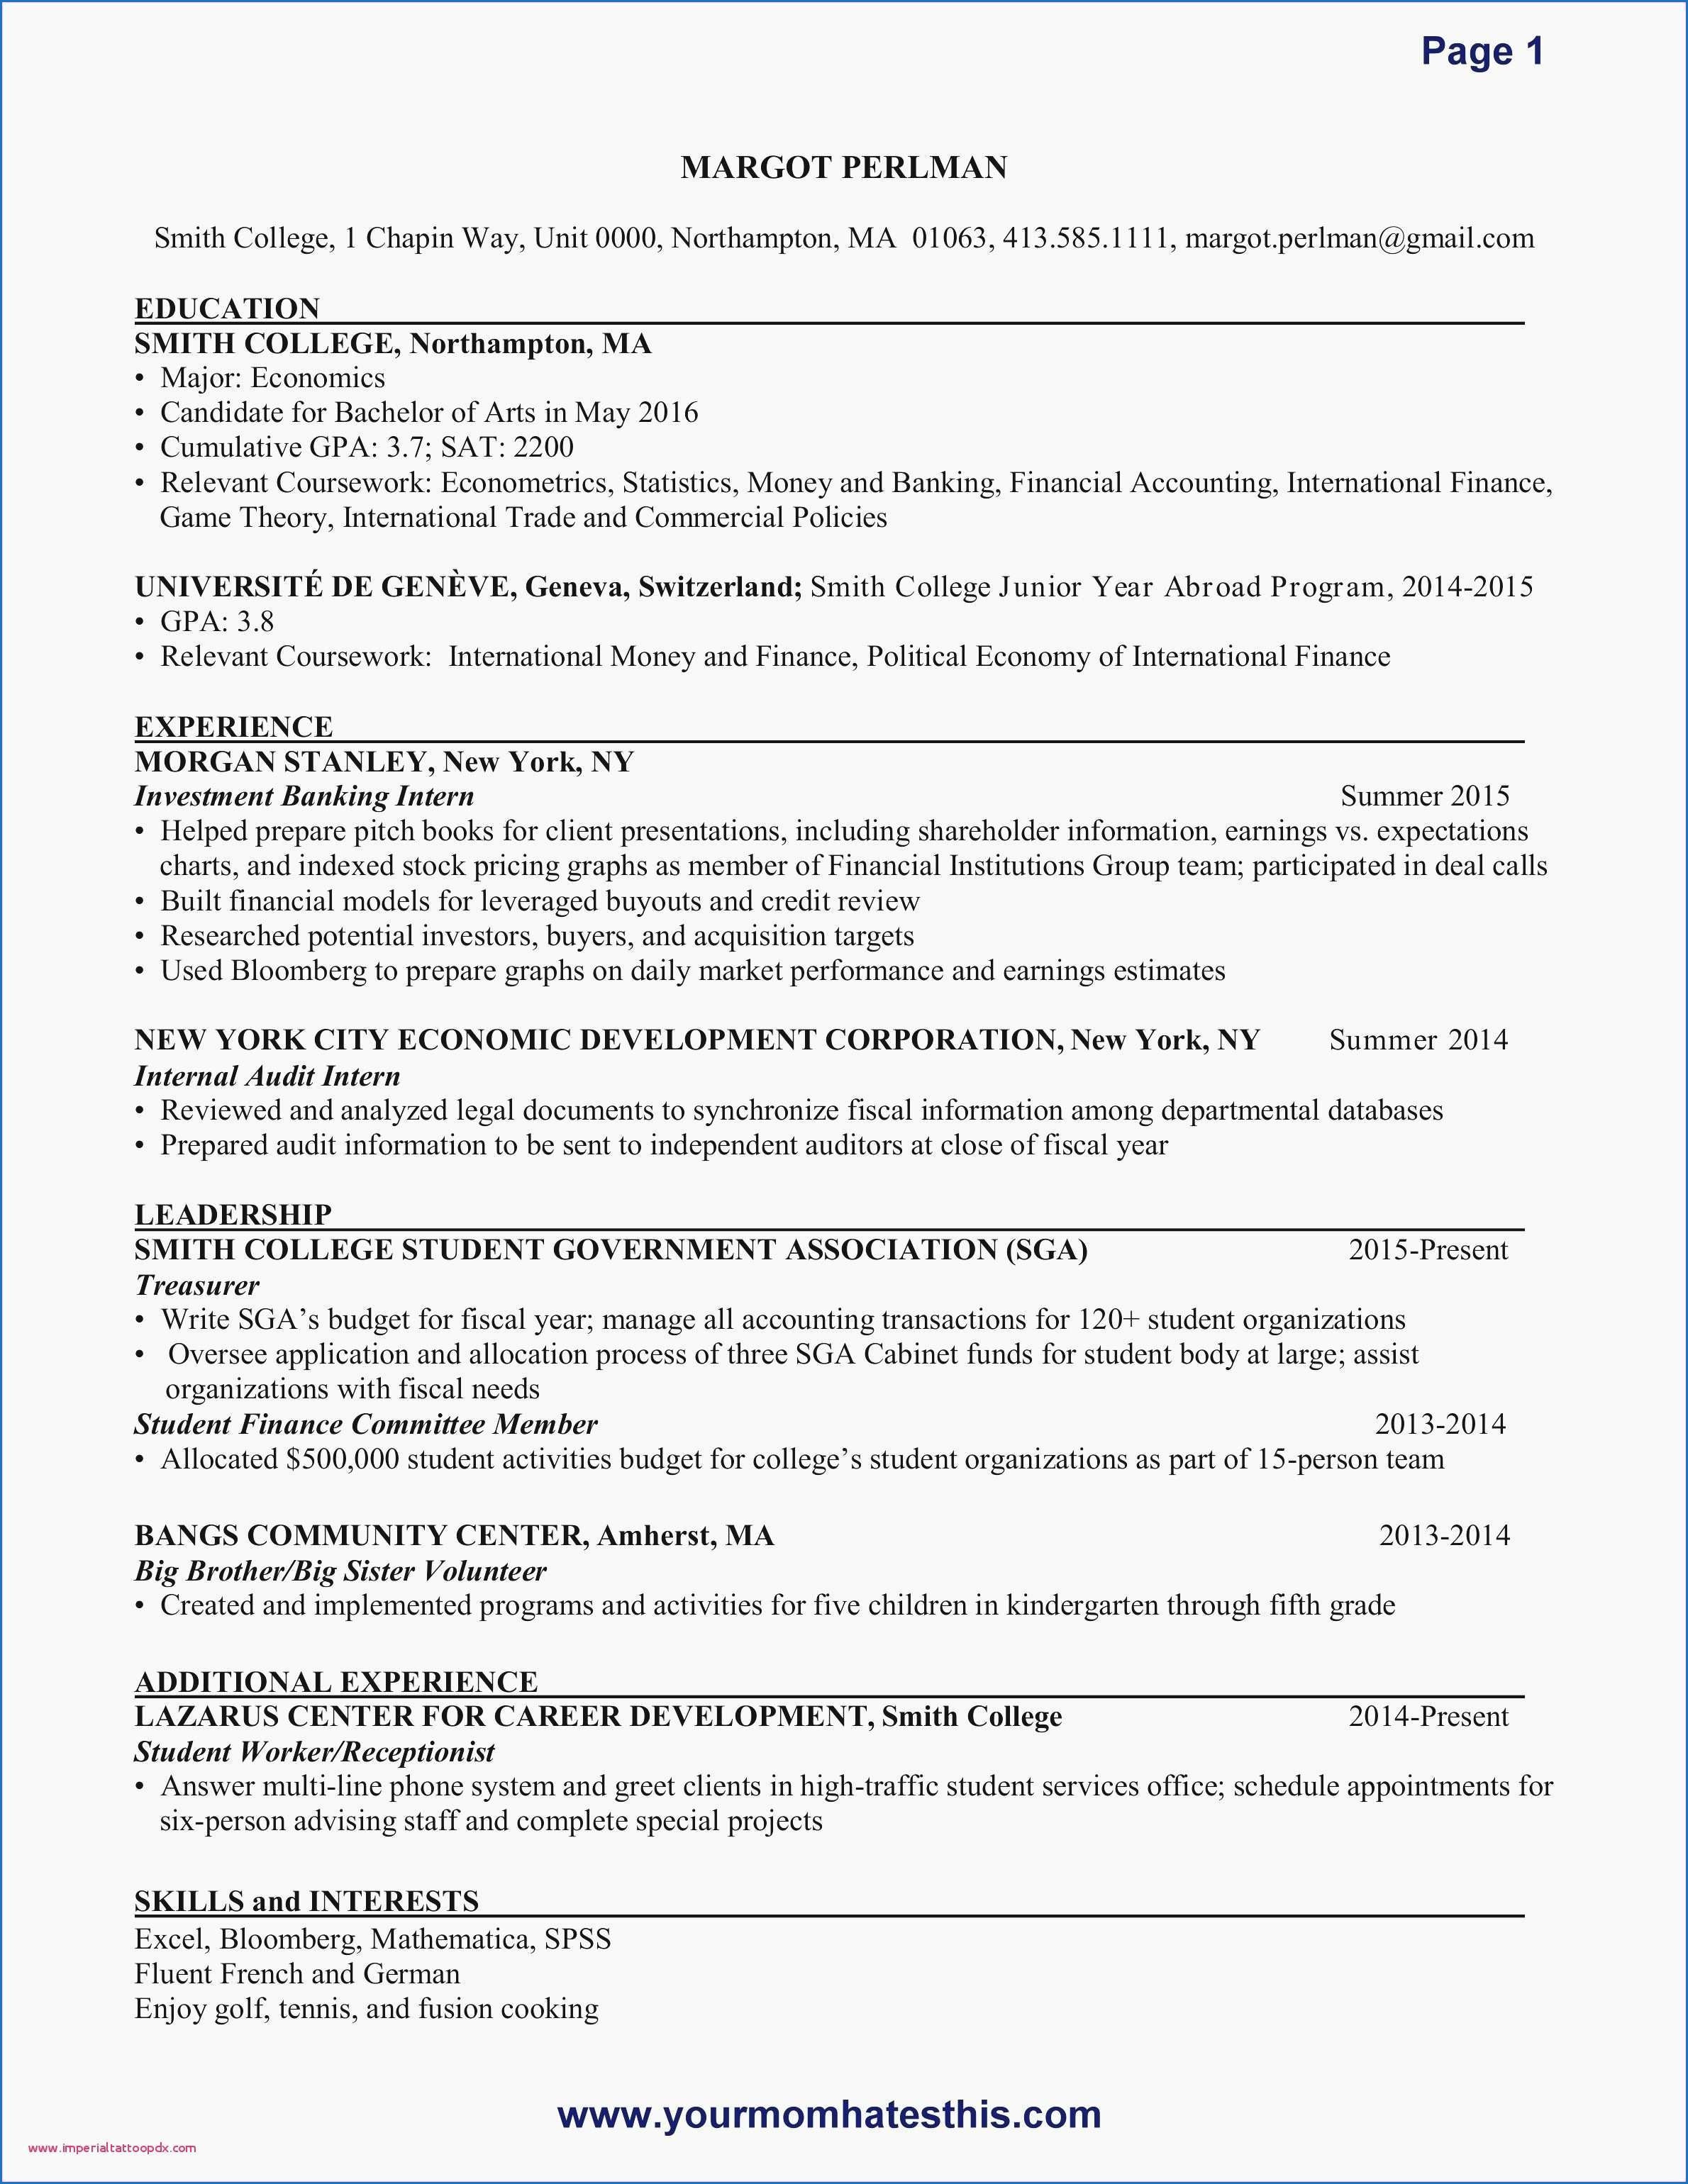 Event Planner Resume Event Planner Cover Letter Sample 14 Resume Cover Letter Examples Event Planning Resume Collection Of Event Planner Cover Letter event planner resume|wikiresume.com